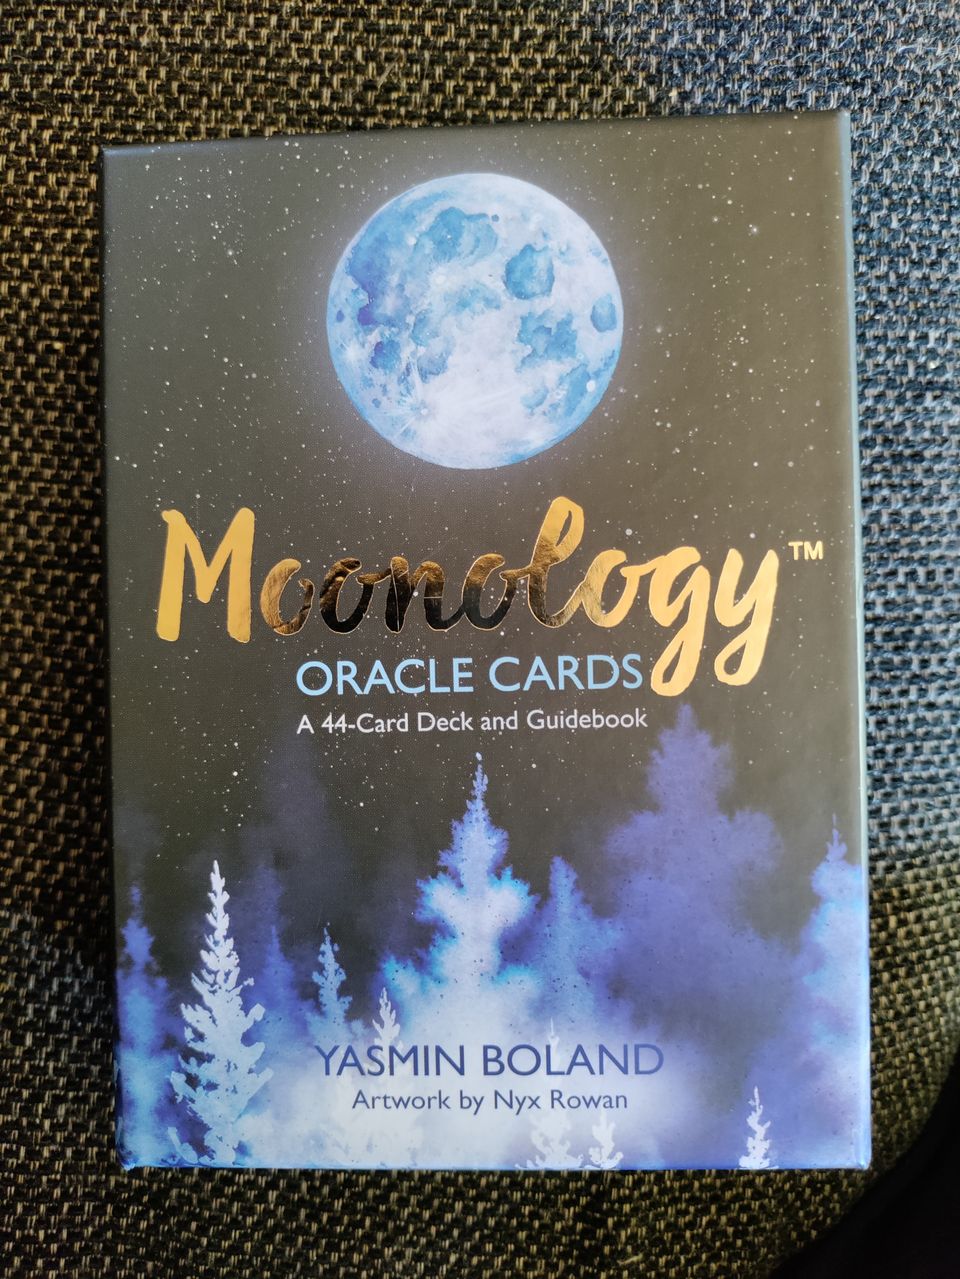 Moonology Oracle cards